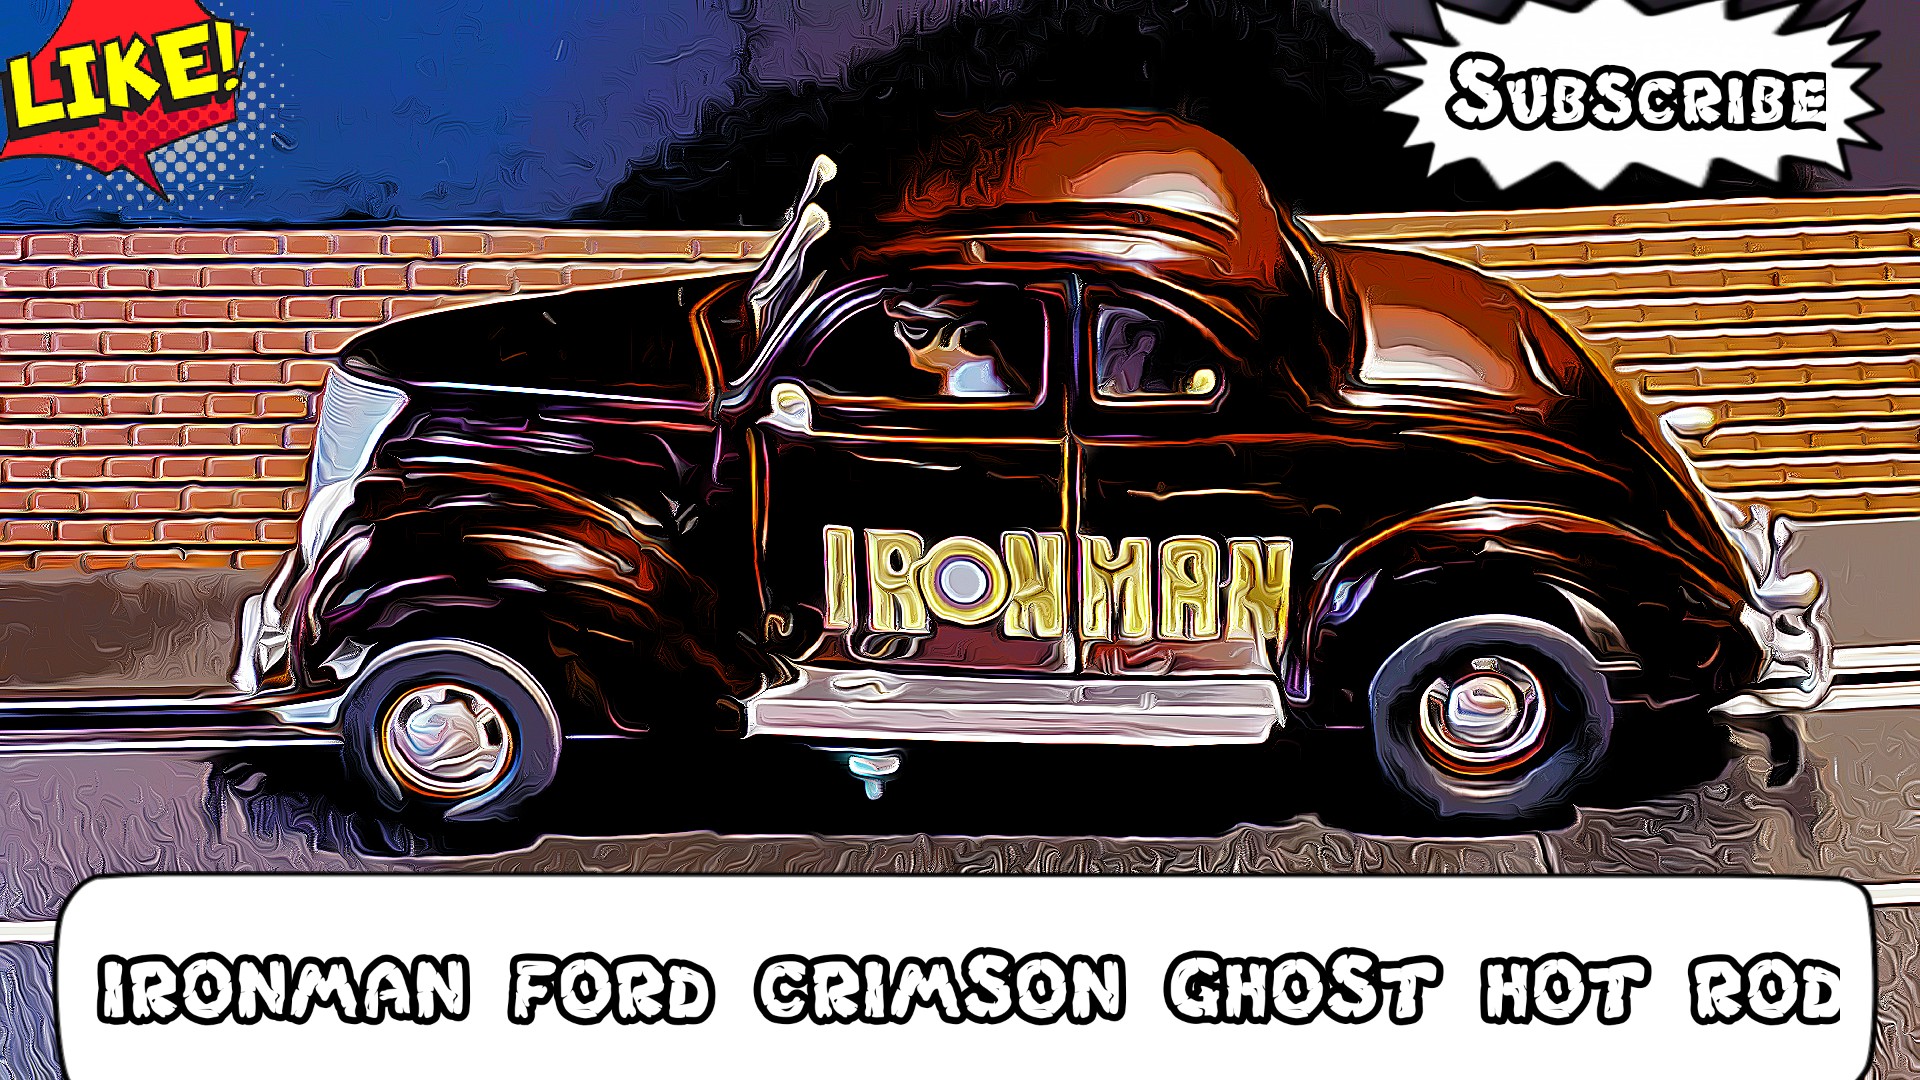 *** DEPOSIT APPLIED, HOLD for Eric R.***, SAVE $375 compared to Ebay price, HOLD for Eric R. * Custom 37’ FORD IRONMAN Crimson Ghost Hot Rod Coupe Slot Car 1/24 Scale